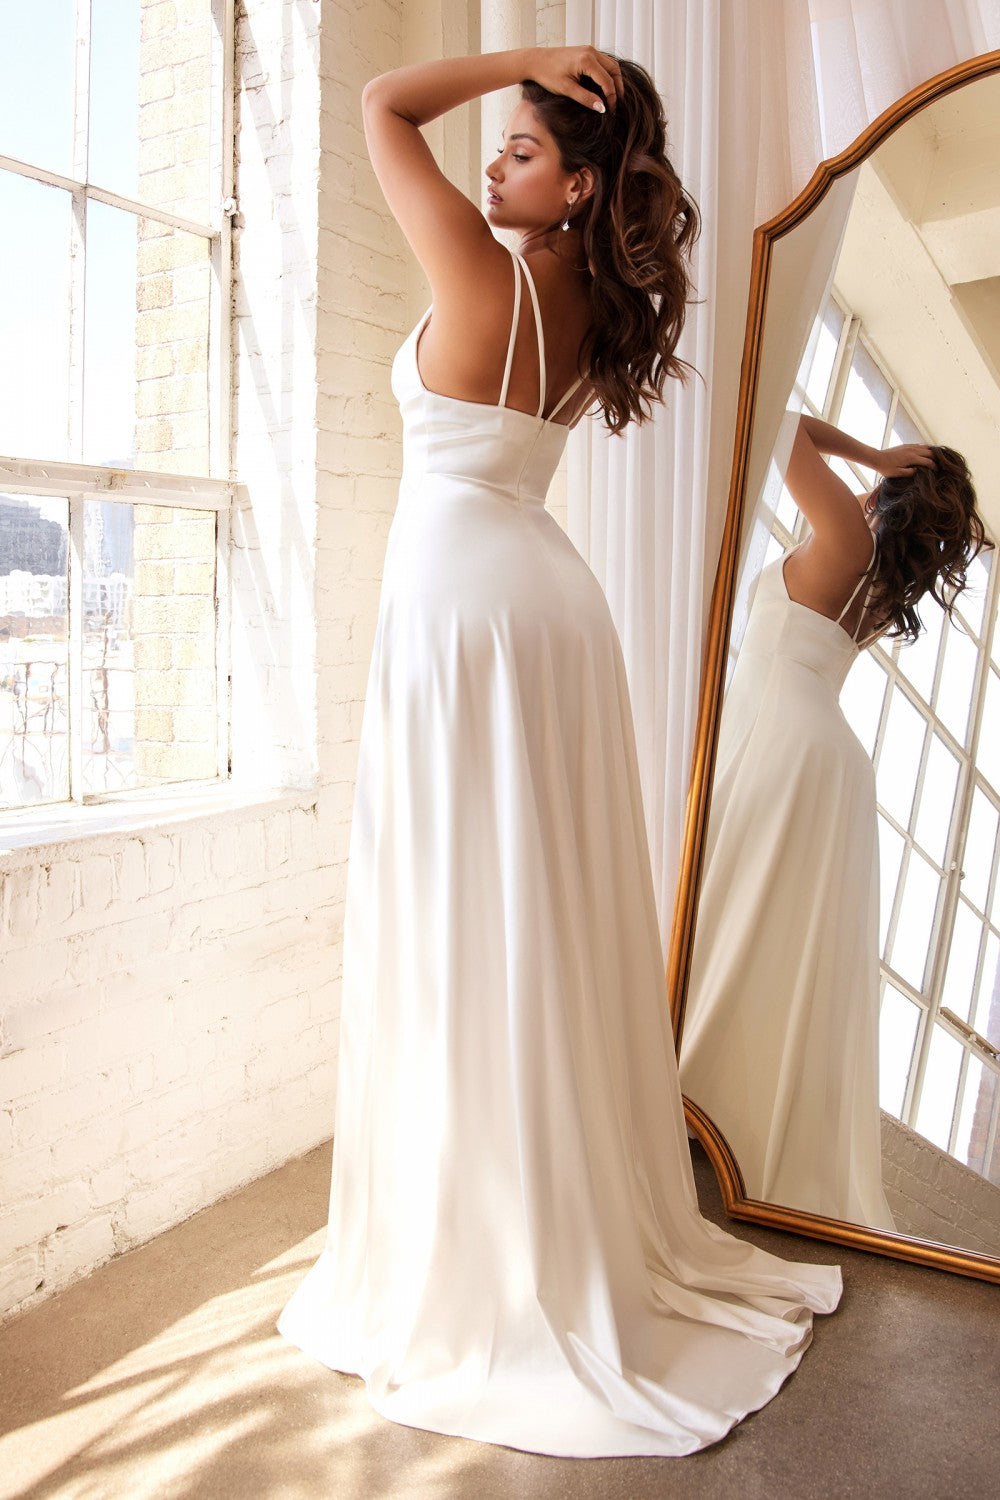 Effortless Classic A-line Bridal Gown Modern Trendy Wedding Ceremony Look Plunging V-neck Open Back Bodice Satin Dress CDCD903W Sale Elsy Style Wedding Dresses